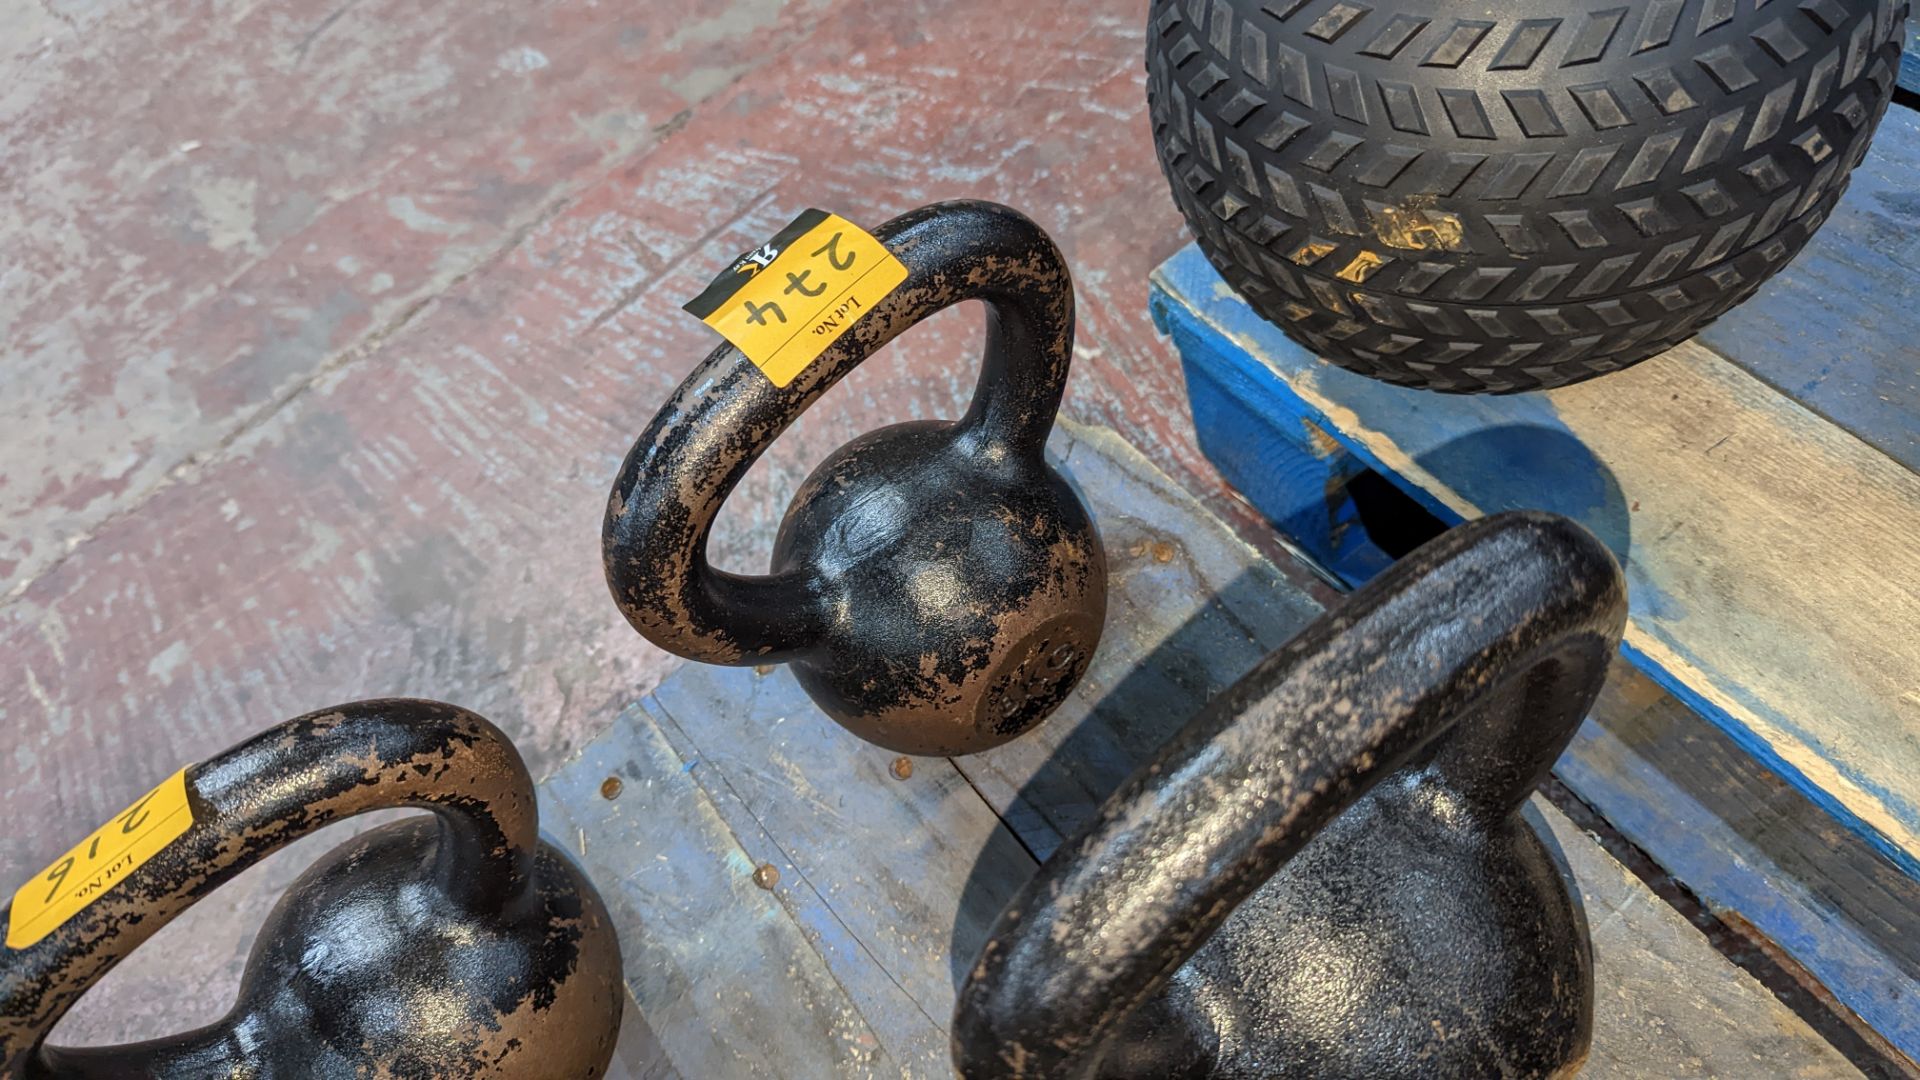 5 off Wolverson kettlebells - this lot comprises 2 x 20kg, 2 x 12kg and 1 x 8kg - Image 10 of 10